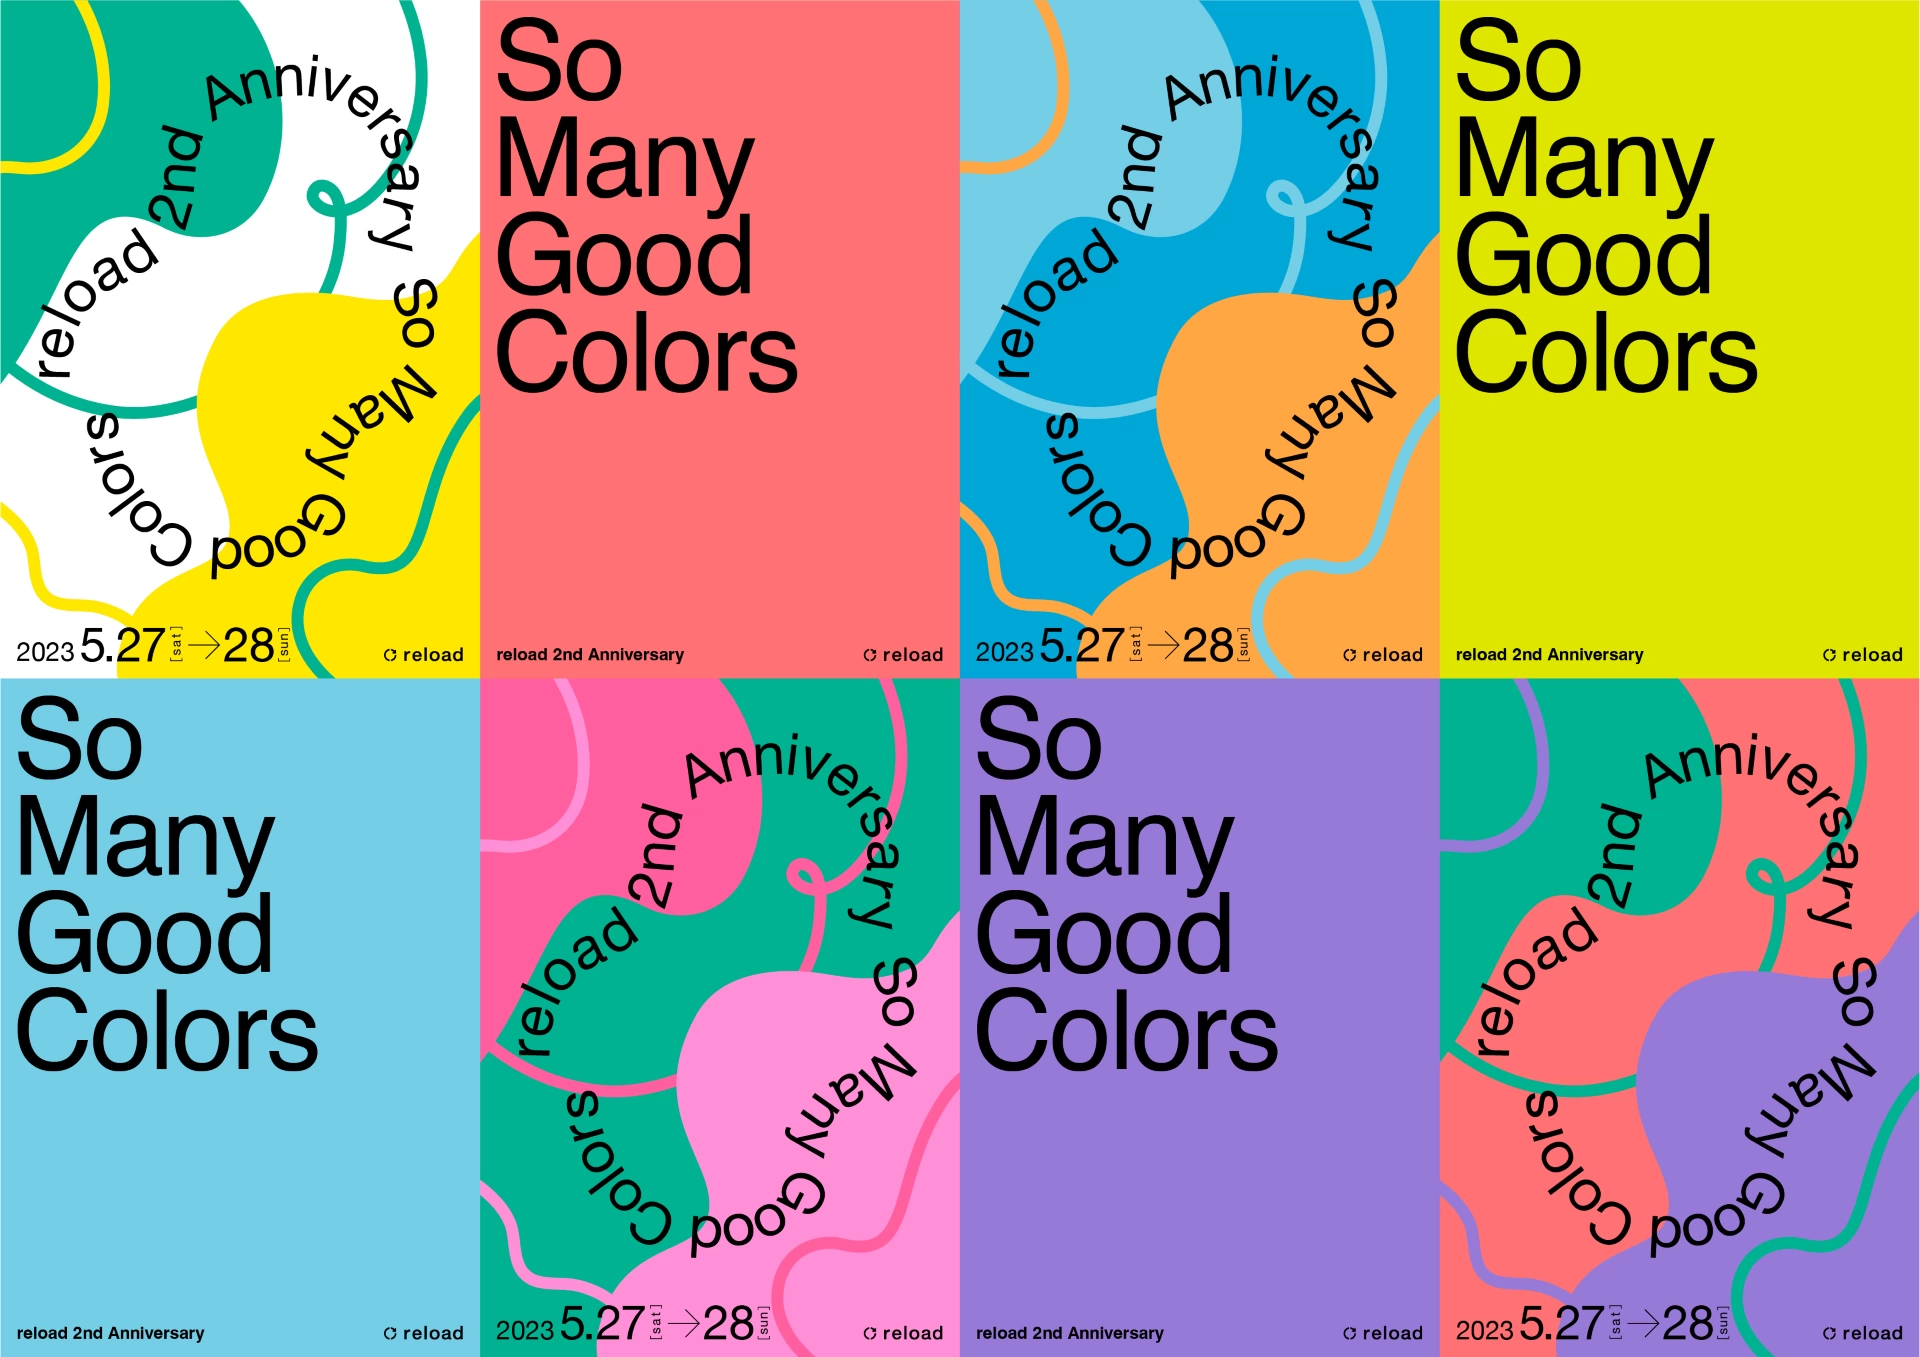 reload 2nd Anniversary “So Many Good Colors”